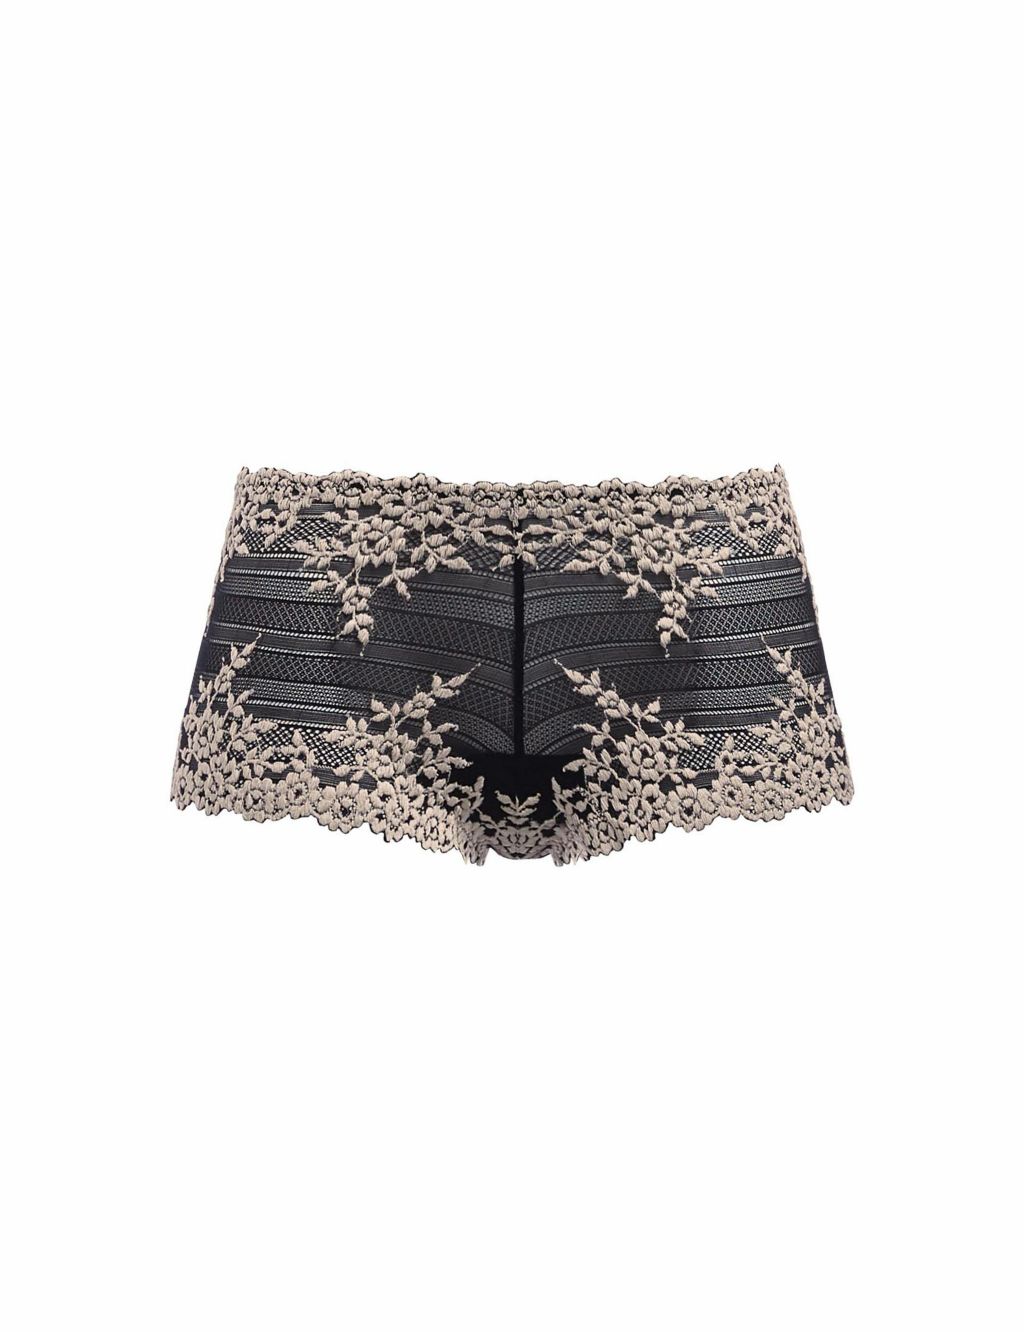 Embrace Lace Low Rise Knicker Shorts 1 of 4